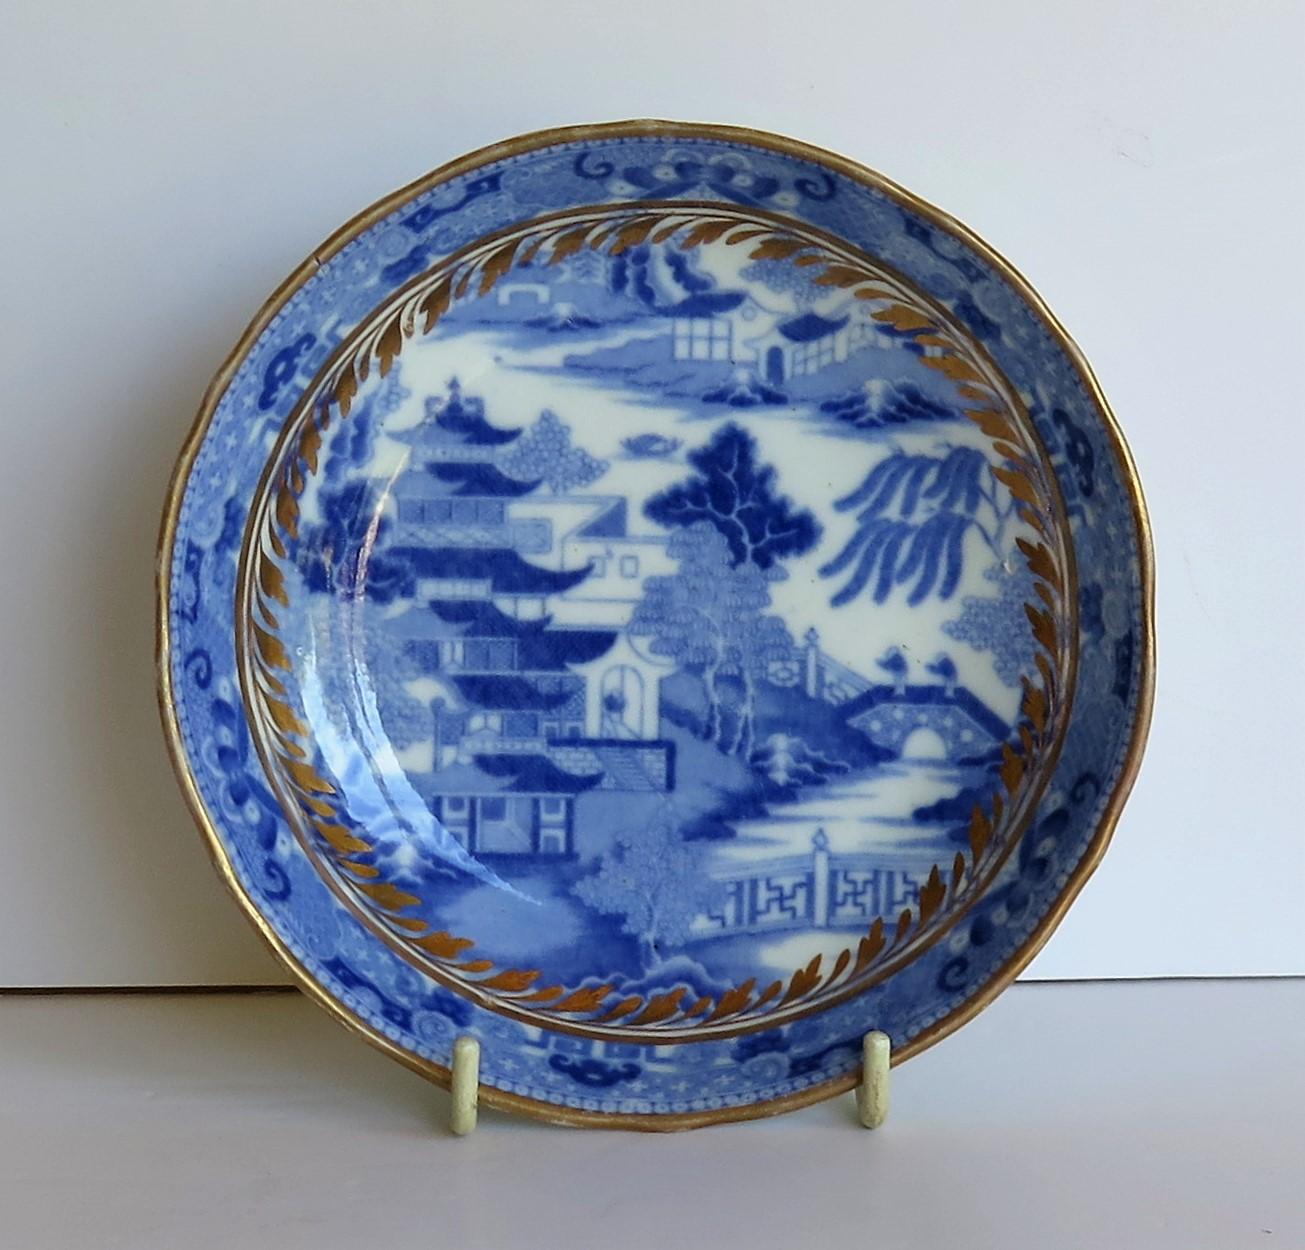 This is a Porcelain blue and white, hand gilded saucer dish made by Miles Mason (Mason's), Staffordshire Potteries, England around the turn of the 18th century, circa 1805. 

The dish is well potted on a low foot with slightly fluted sides and a